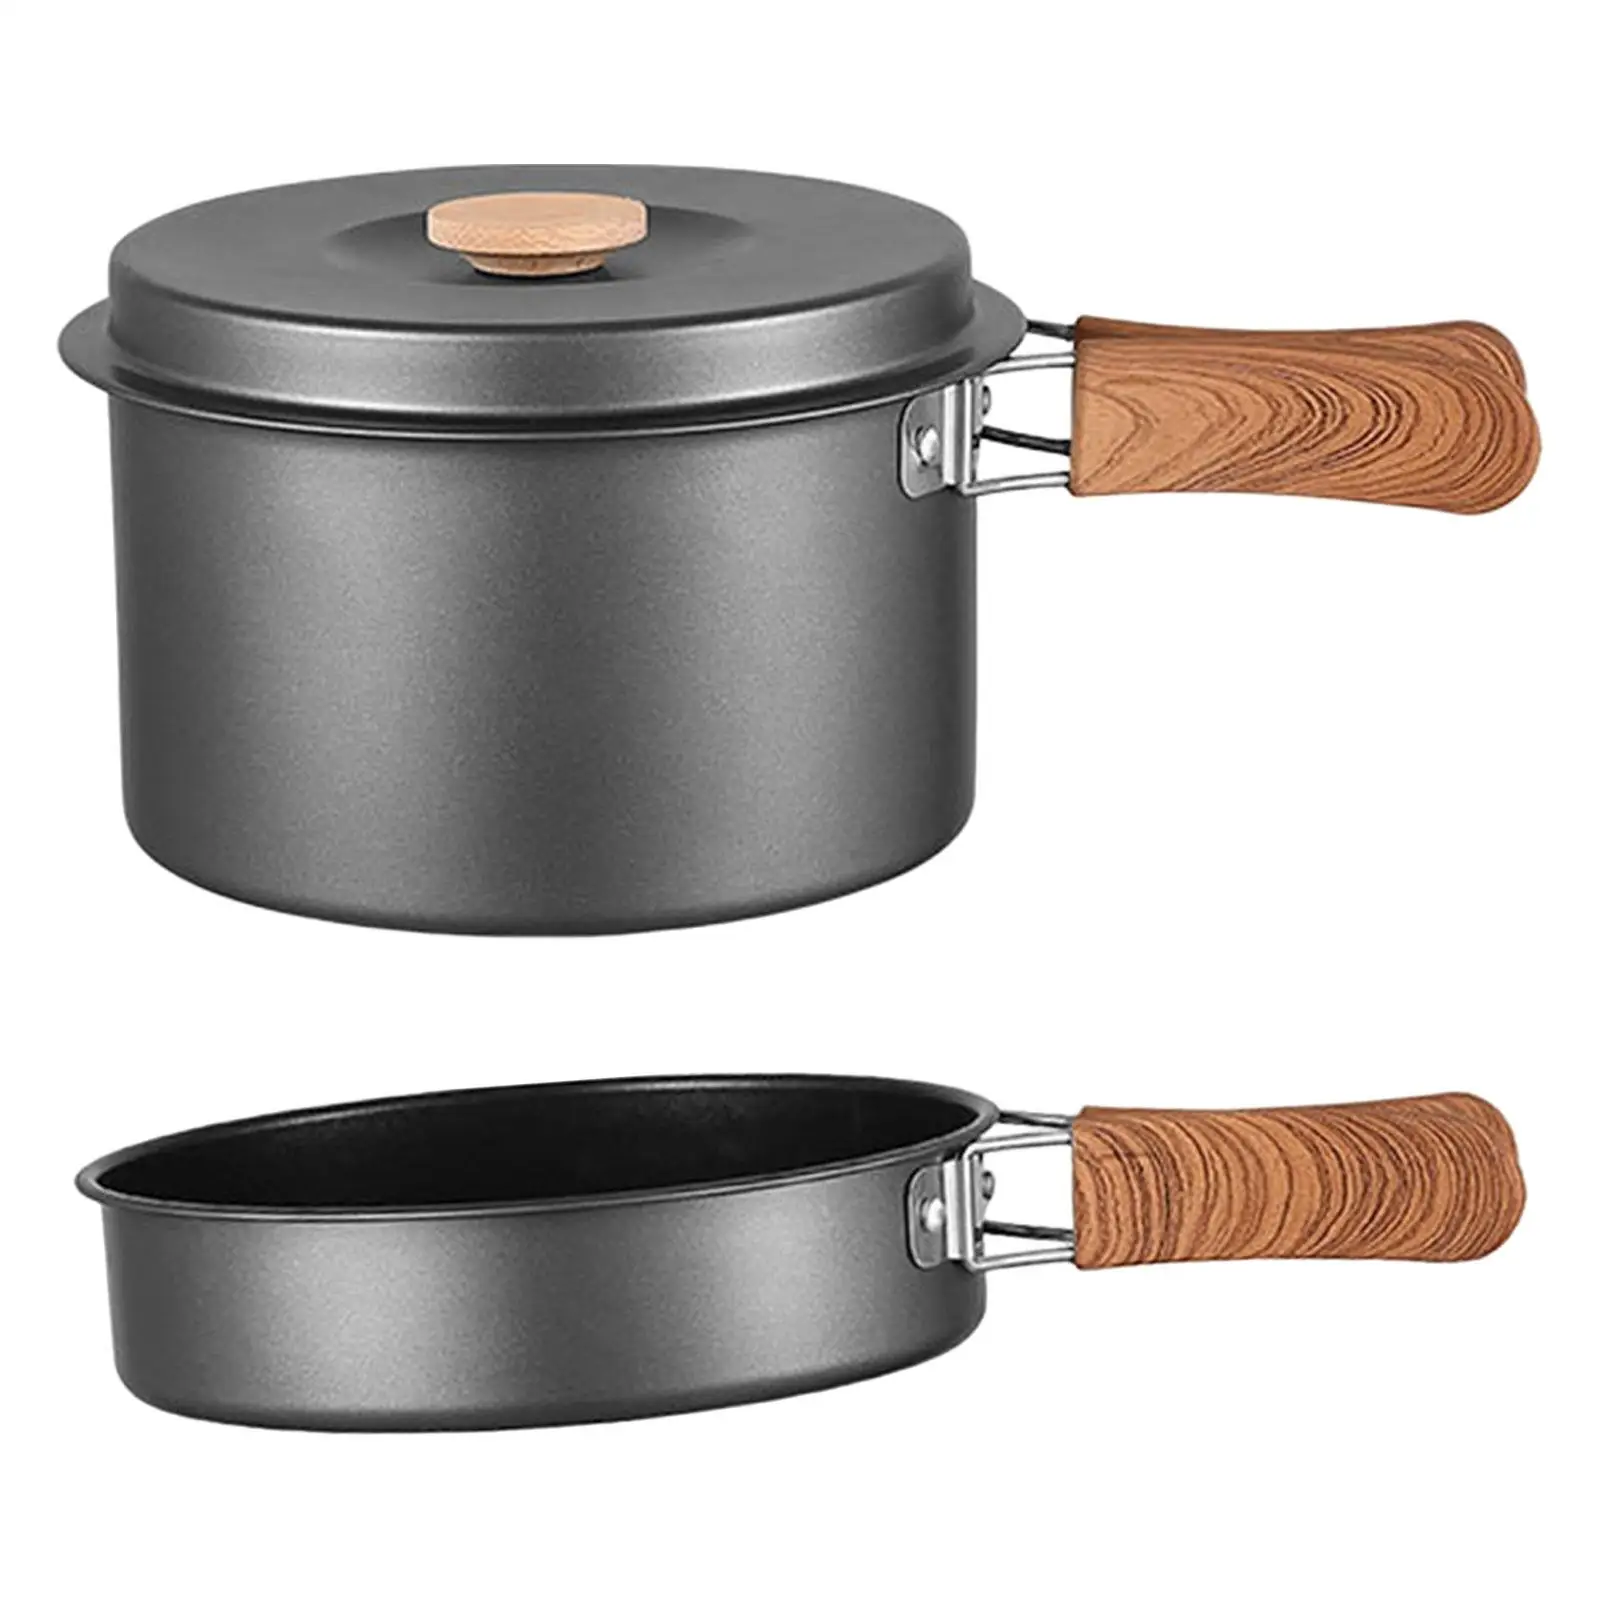 Camping Pot Campfire Kettle with Lid and Folding Handle Cookware Cooking Pot